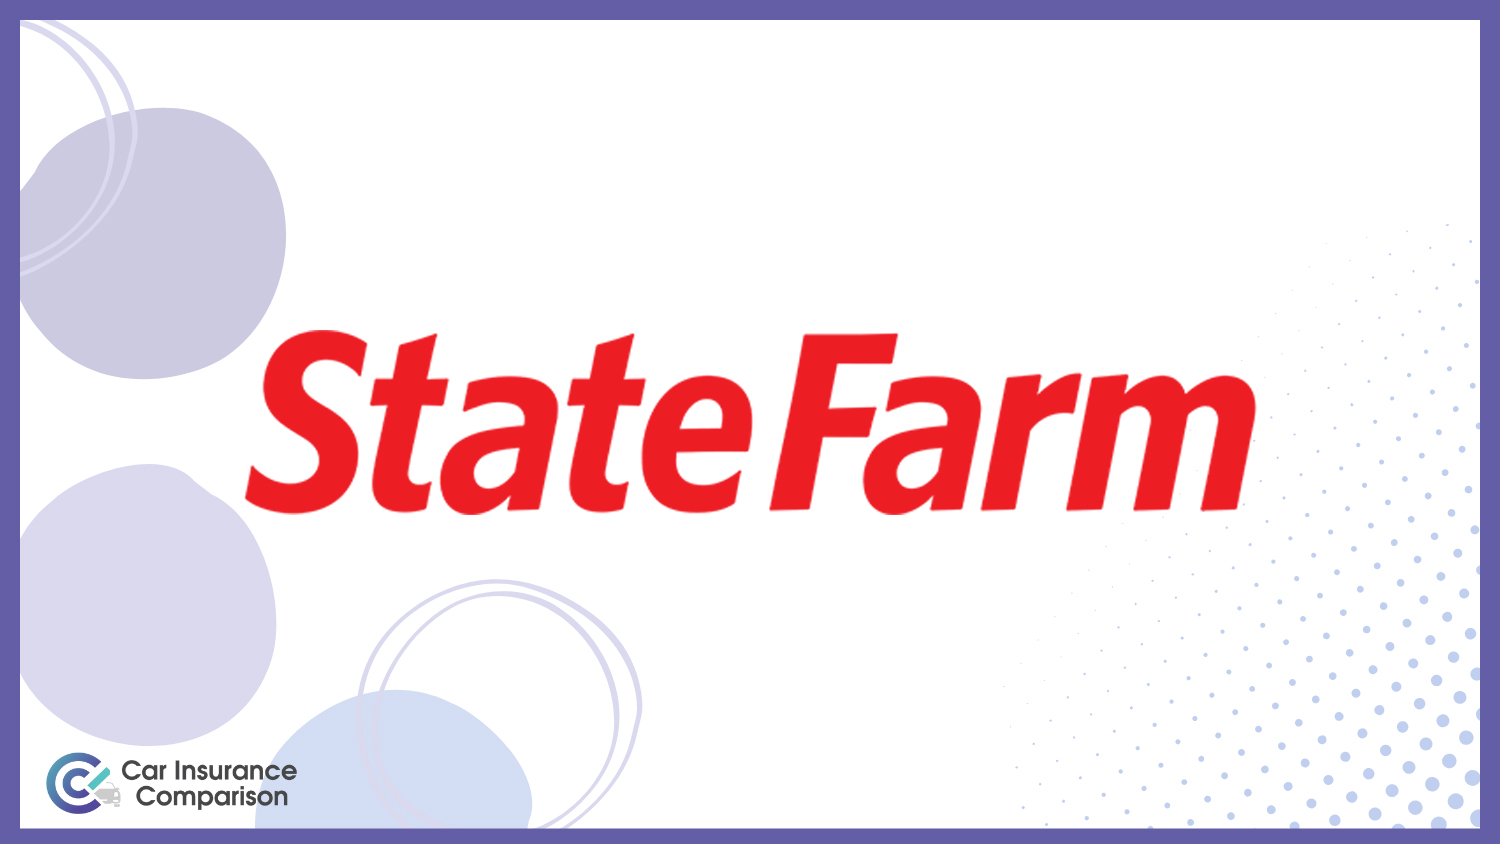 State Farm: Best Car Insurance for Real Estate Agents